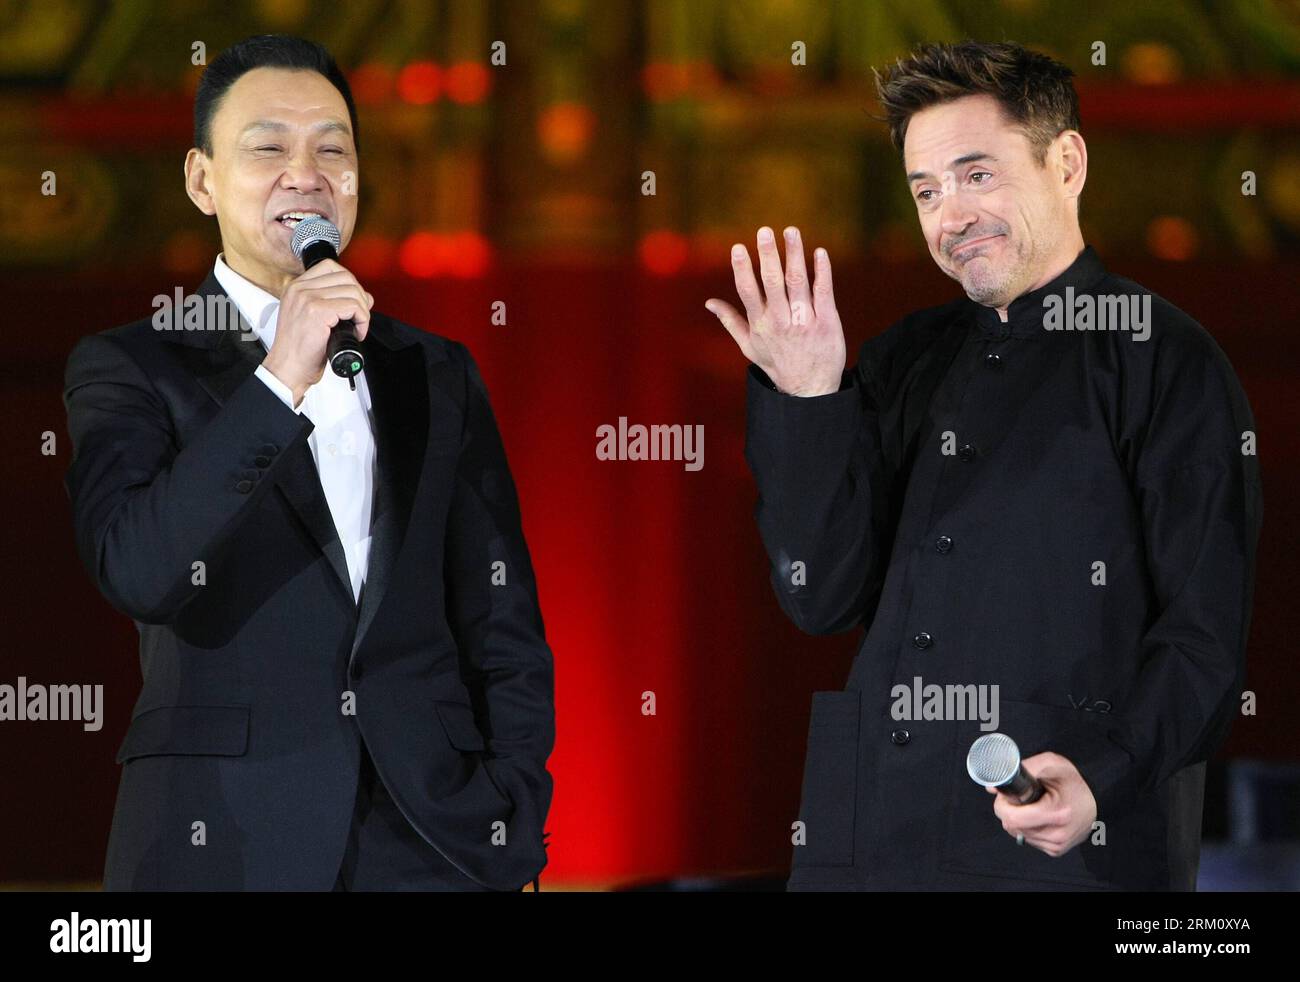 Bildnummer: 59481064  Datum: 06.04.2013  Copyright: imago/Xinhua BEIJING, April 6, 2013 -- Robert Downey Jr. (R), leading actor of the Hollywood superhero movie Iron Man 3, poses for photos with Chinese actor Wang Xueqi during a promotional event of the movie at the Imperial Ancestral Temple in Beijing, capital of China, April 6, 2013. The movie Iron Man 3 is planned to release on the Chinese mainland in May. (Xinhua) (lfj) CHINA-BEIJING- IRON MAN 3 -PROMOTION (CN) PUBLICATIONxNOTxINxCHN Entertainment people xas x0x 2013 quer premiumd     59481064 Date 06 04 2013 Copyright Imago XINHUA Beijing Stock Photo